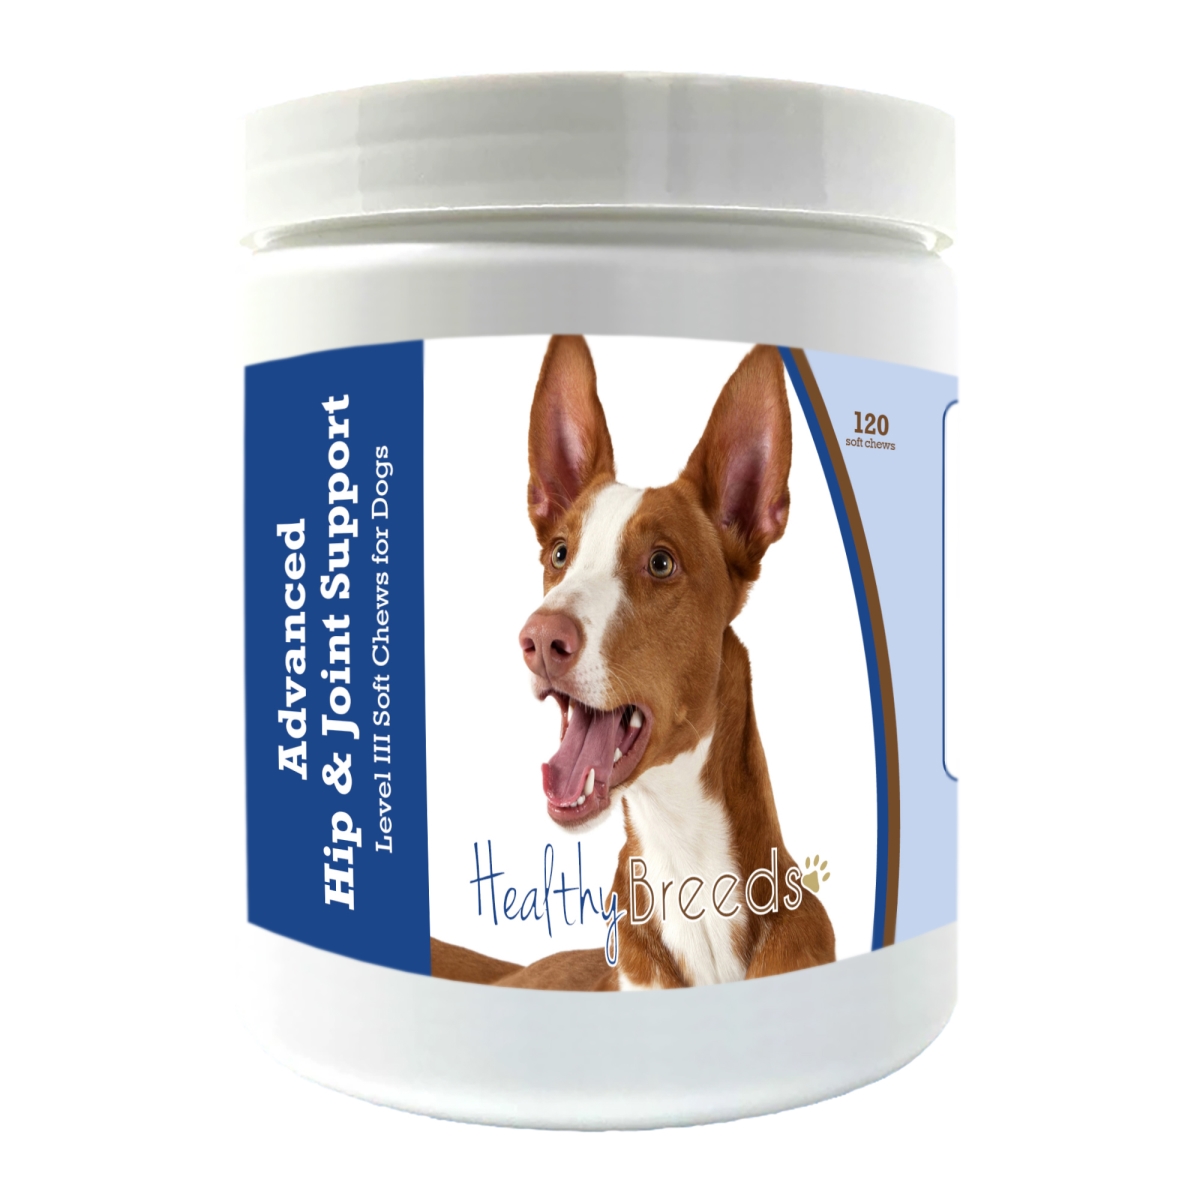 Picture of Healthy Breeds 192959898415 Ibizan Hound Advanced Hip & Joint Support Level III Soft Chews for Dogs